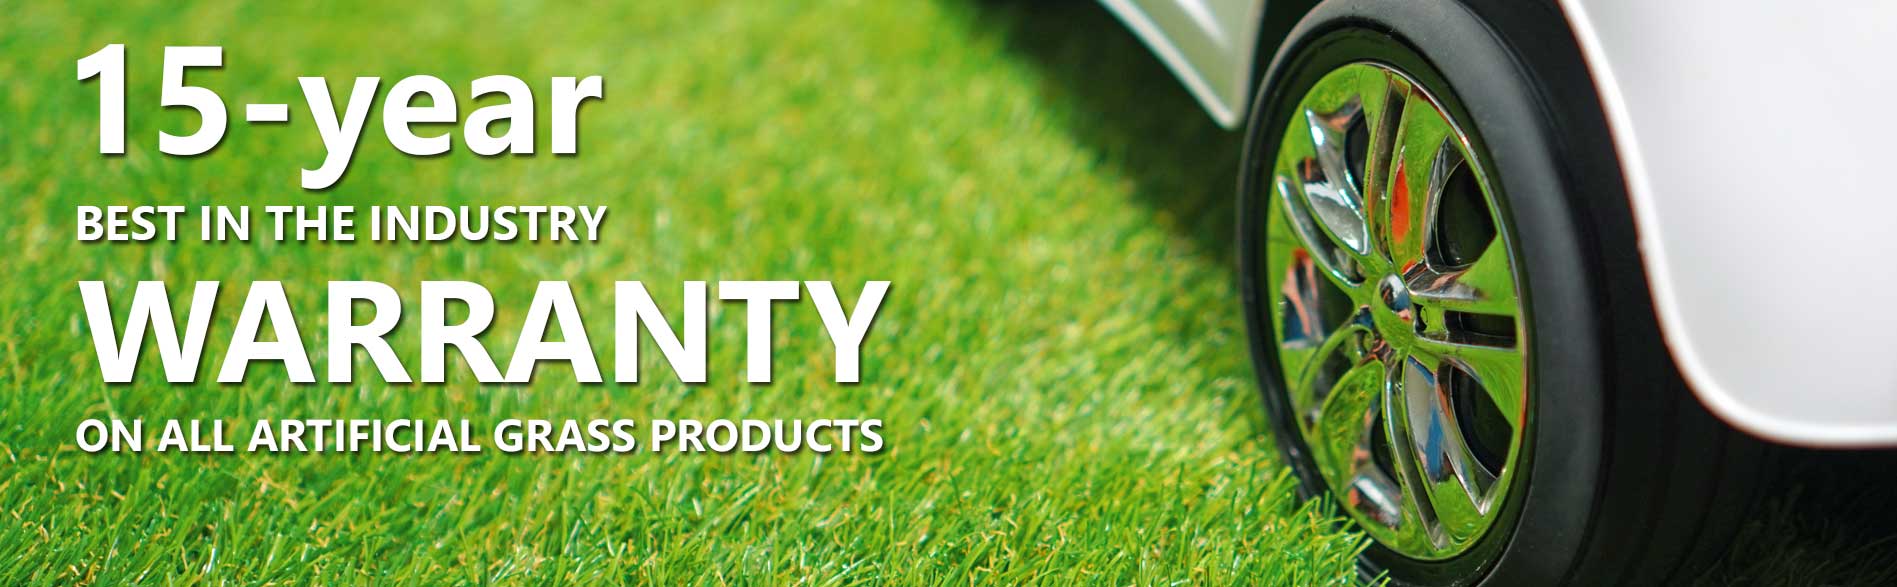 15-year warranty on all artificial grass products